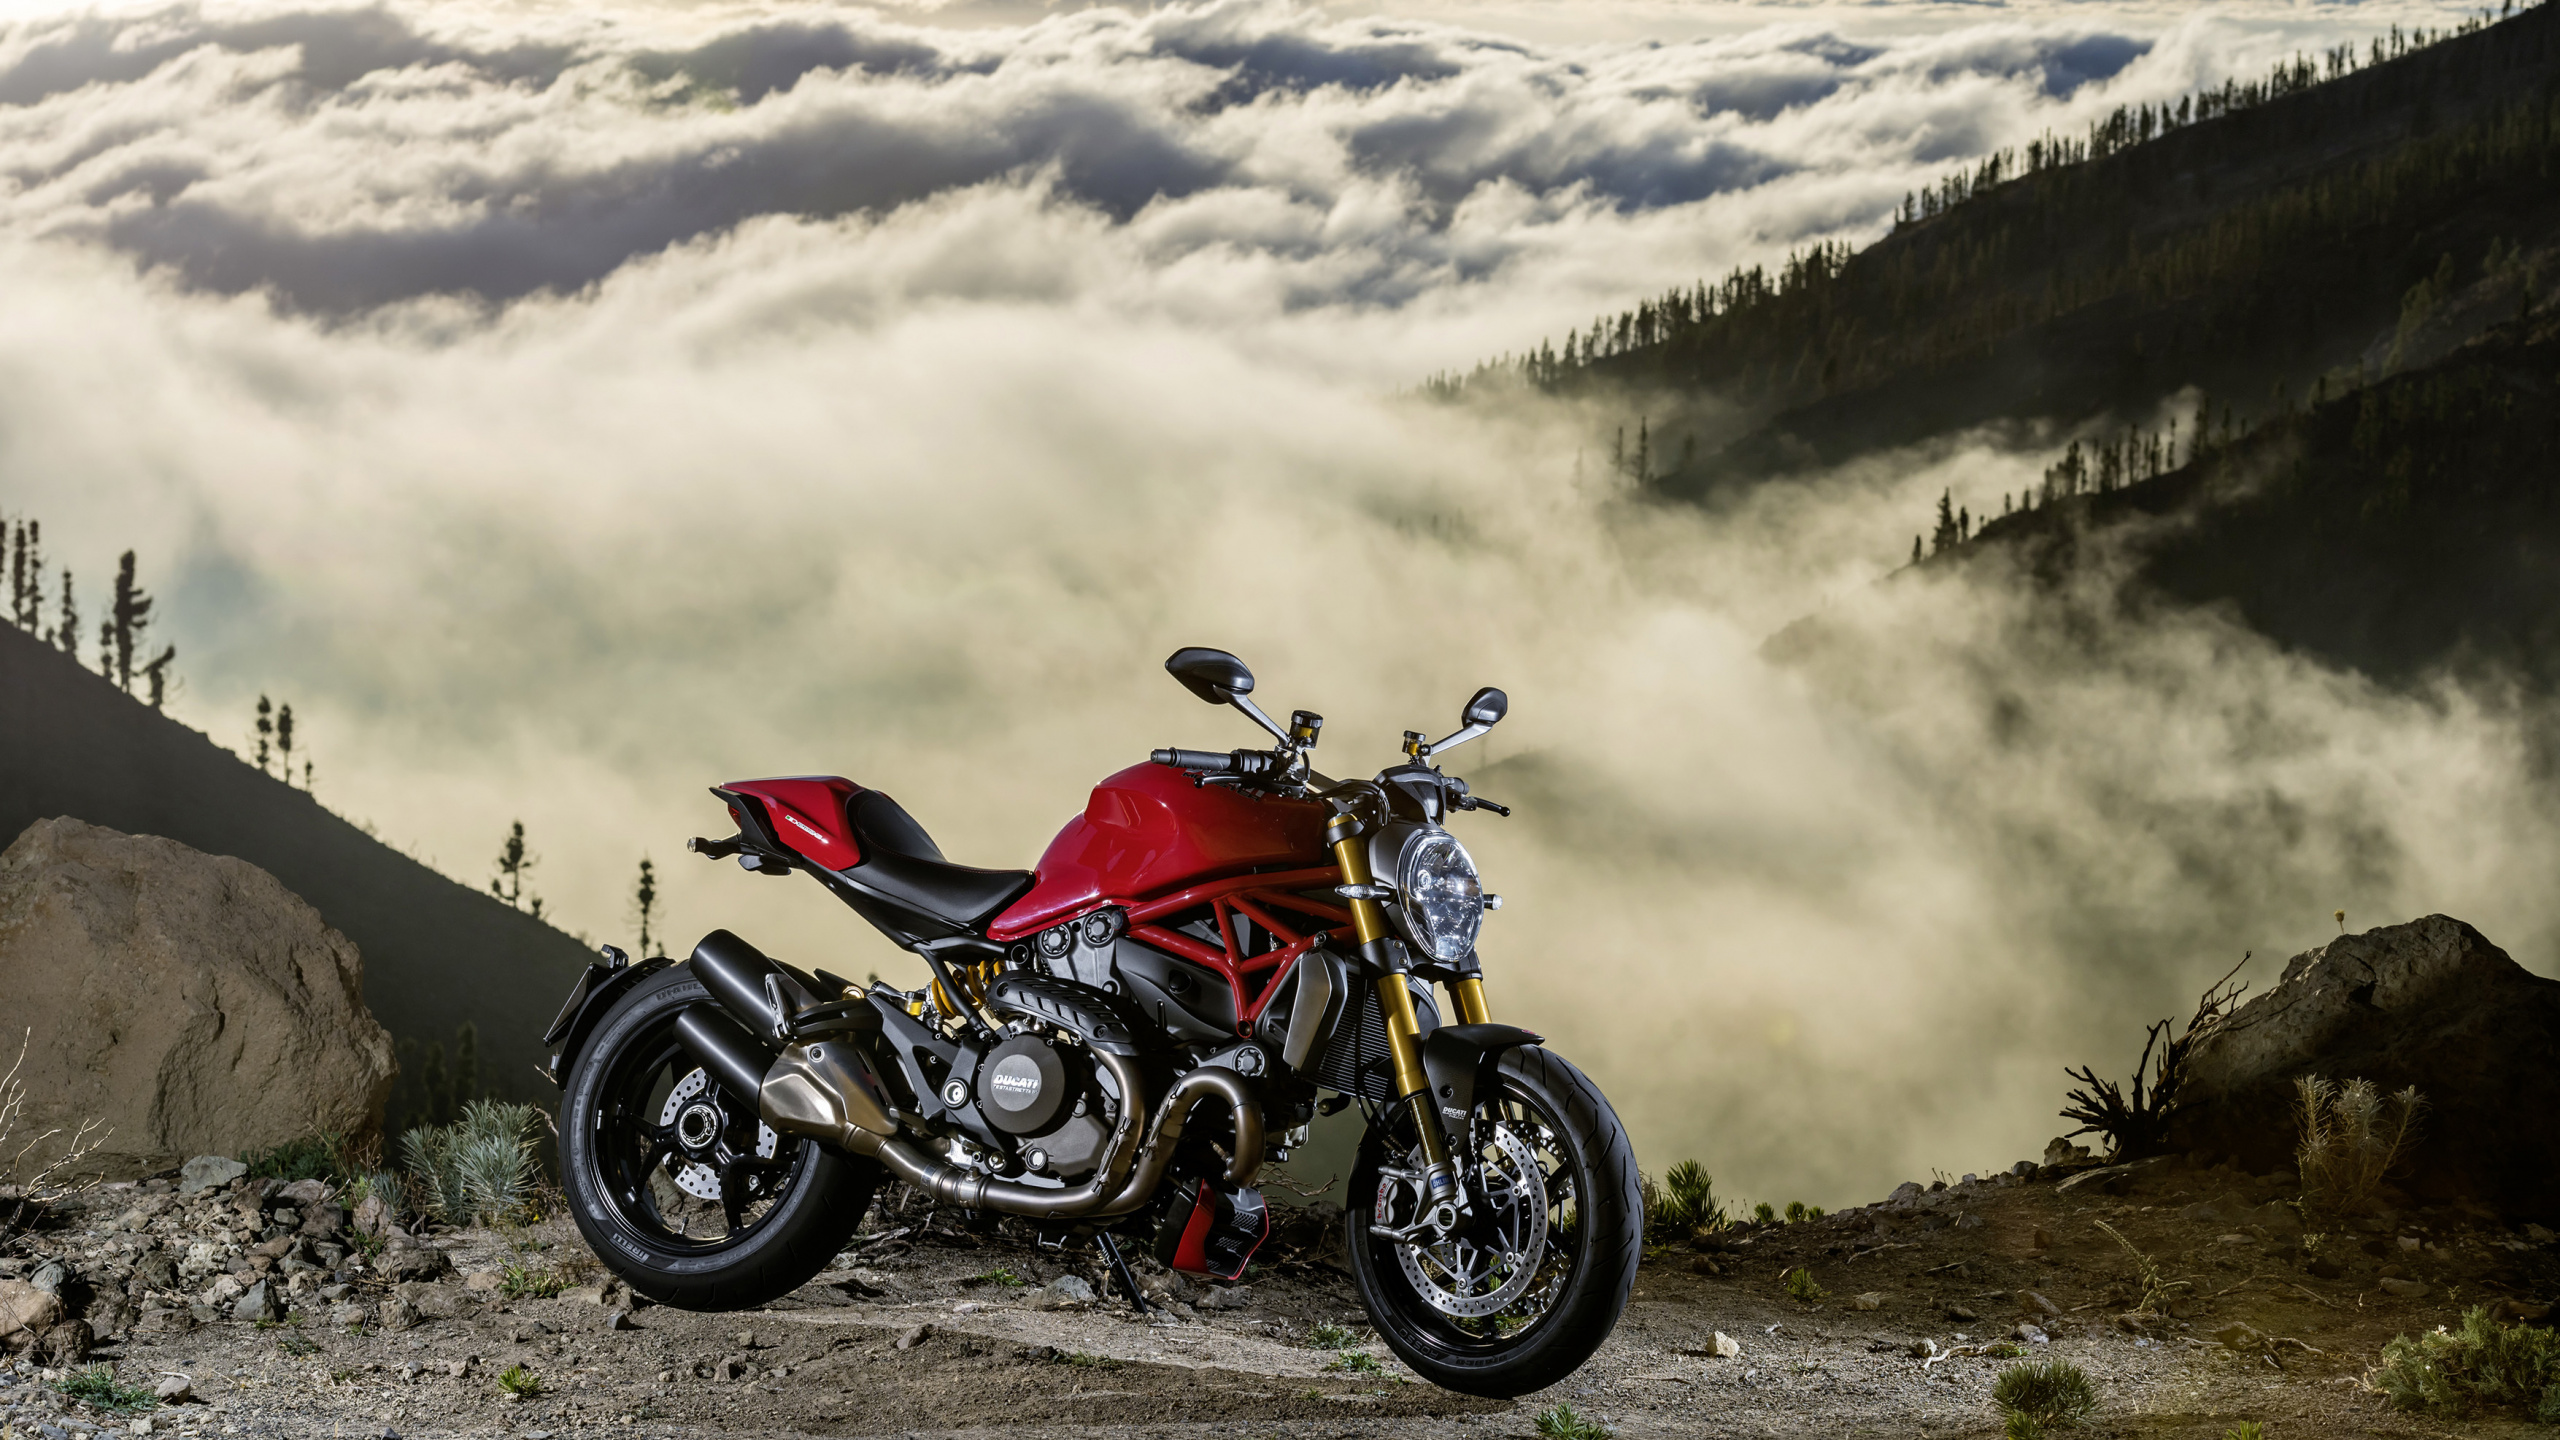 Red and Black Sports Bike on Brown Field Under White Clouds During Daytime. Wallpaper in 2560x1440 Resolution